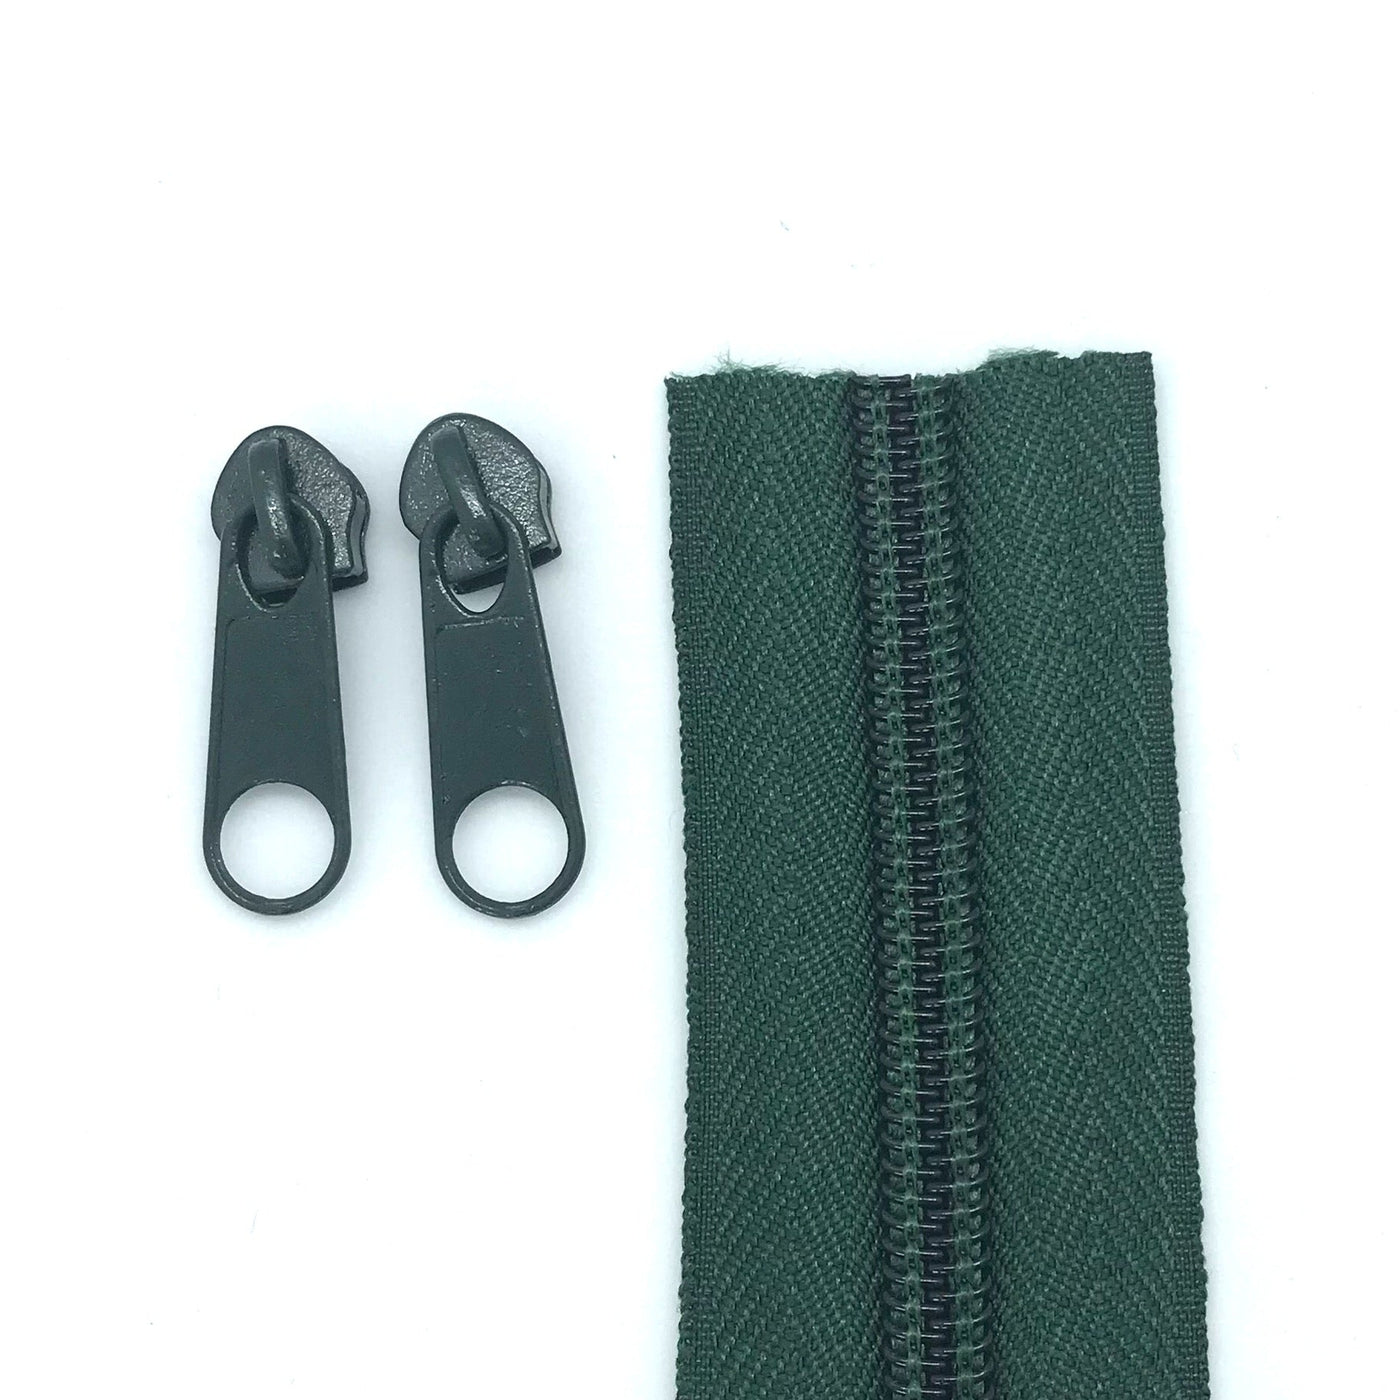 Dark bottle green continuous tape in standard style sizes #3 and #5